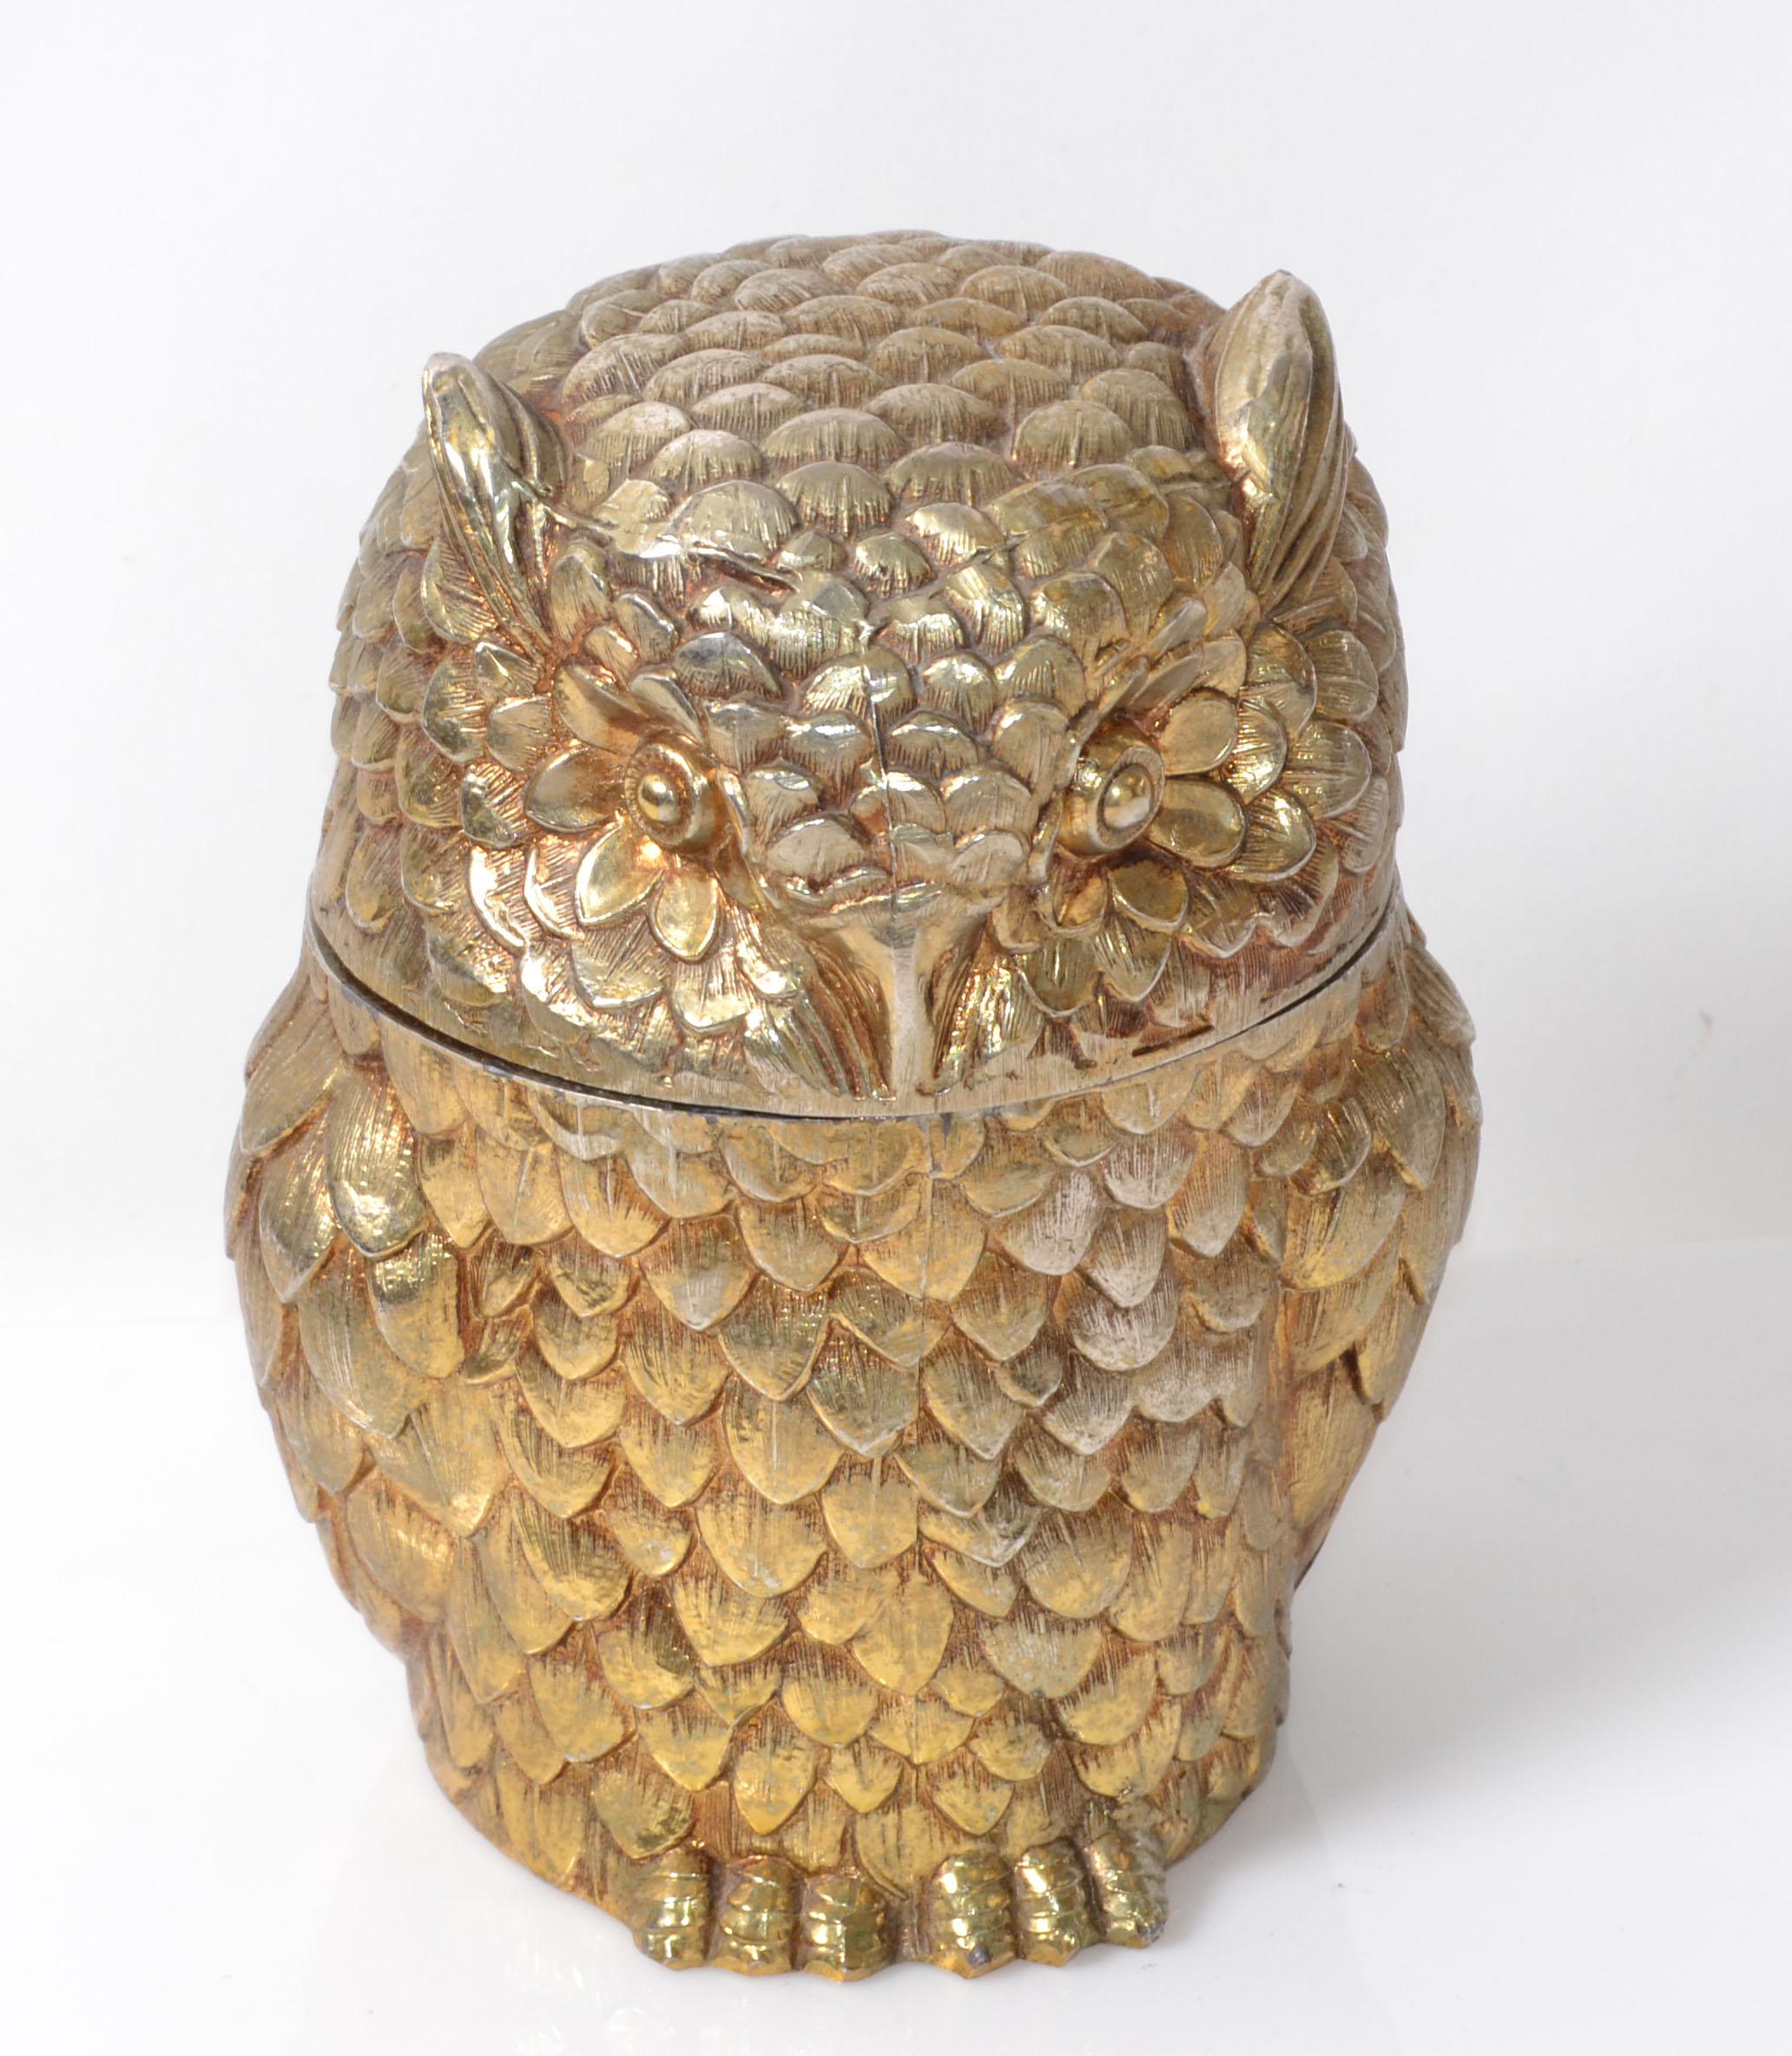 Hand-Crafted Gold Plated Mauro Manetti Insulated Owl Ice Bucket Mid-Century Modern Italy 1940